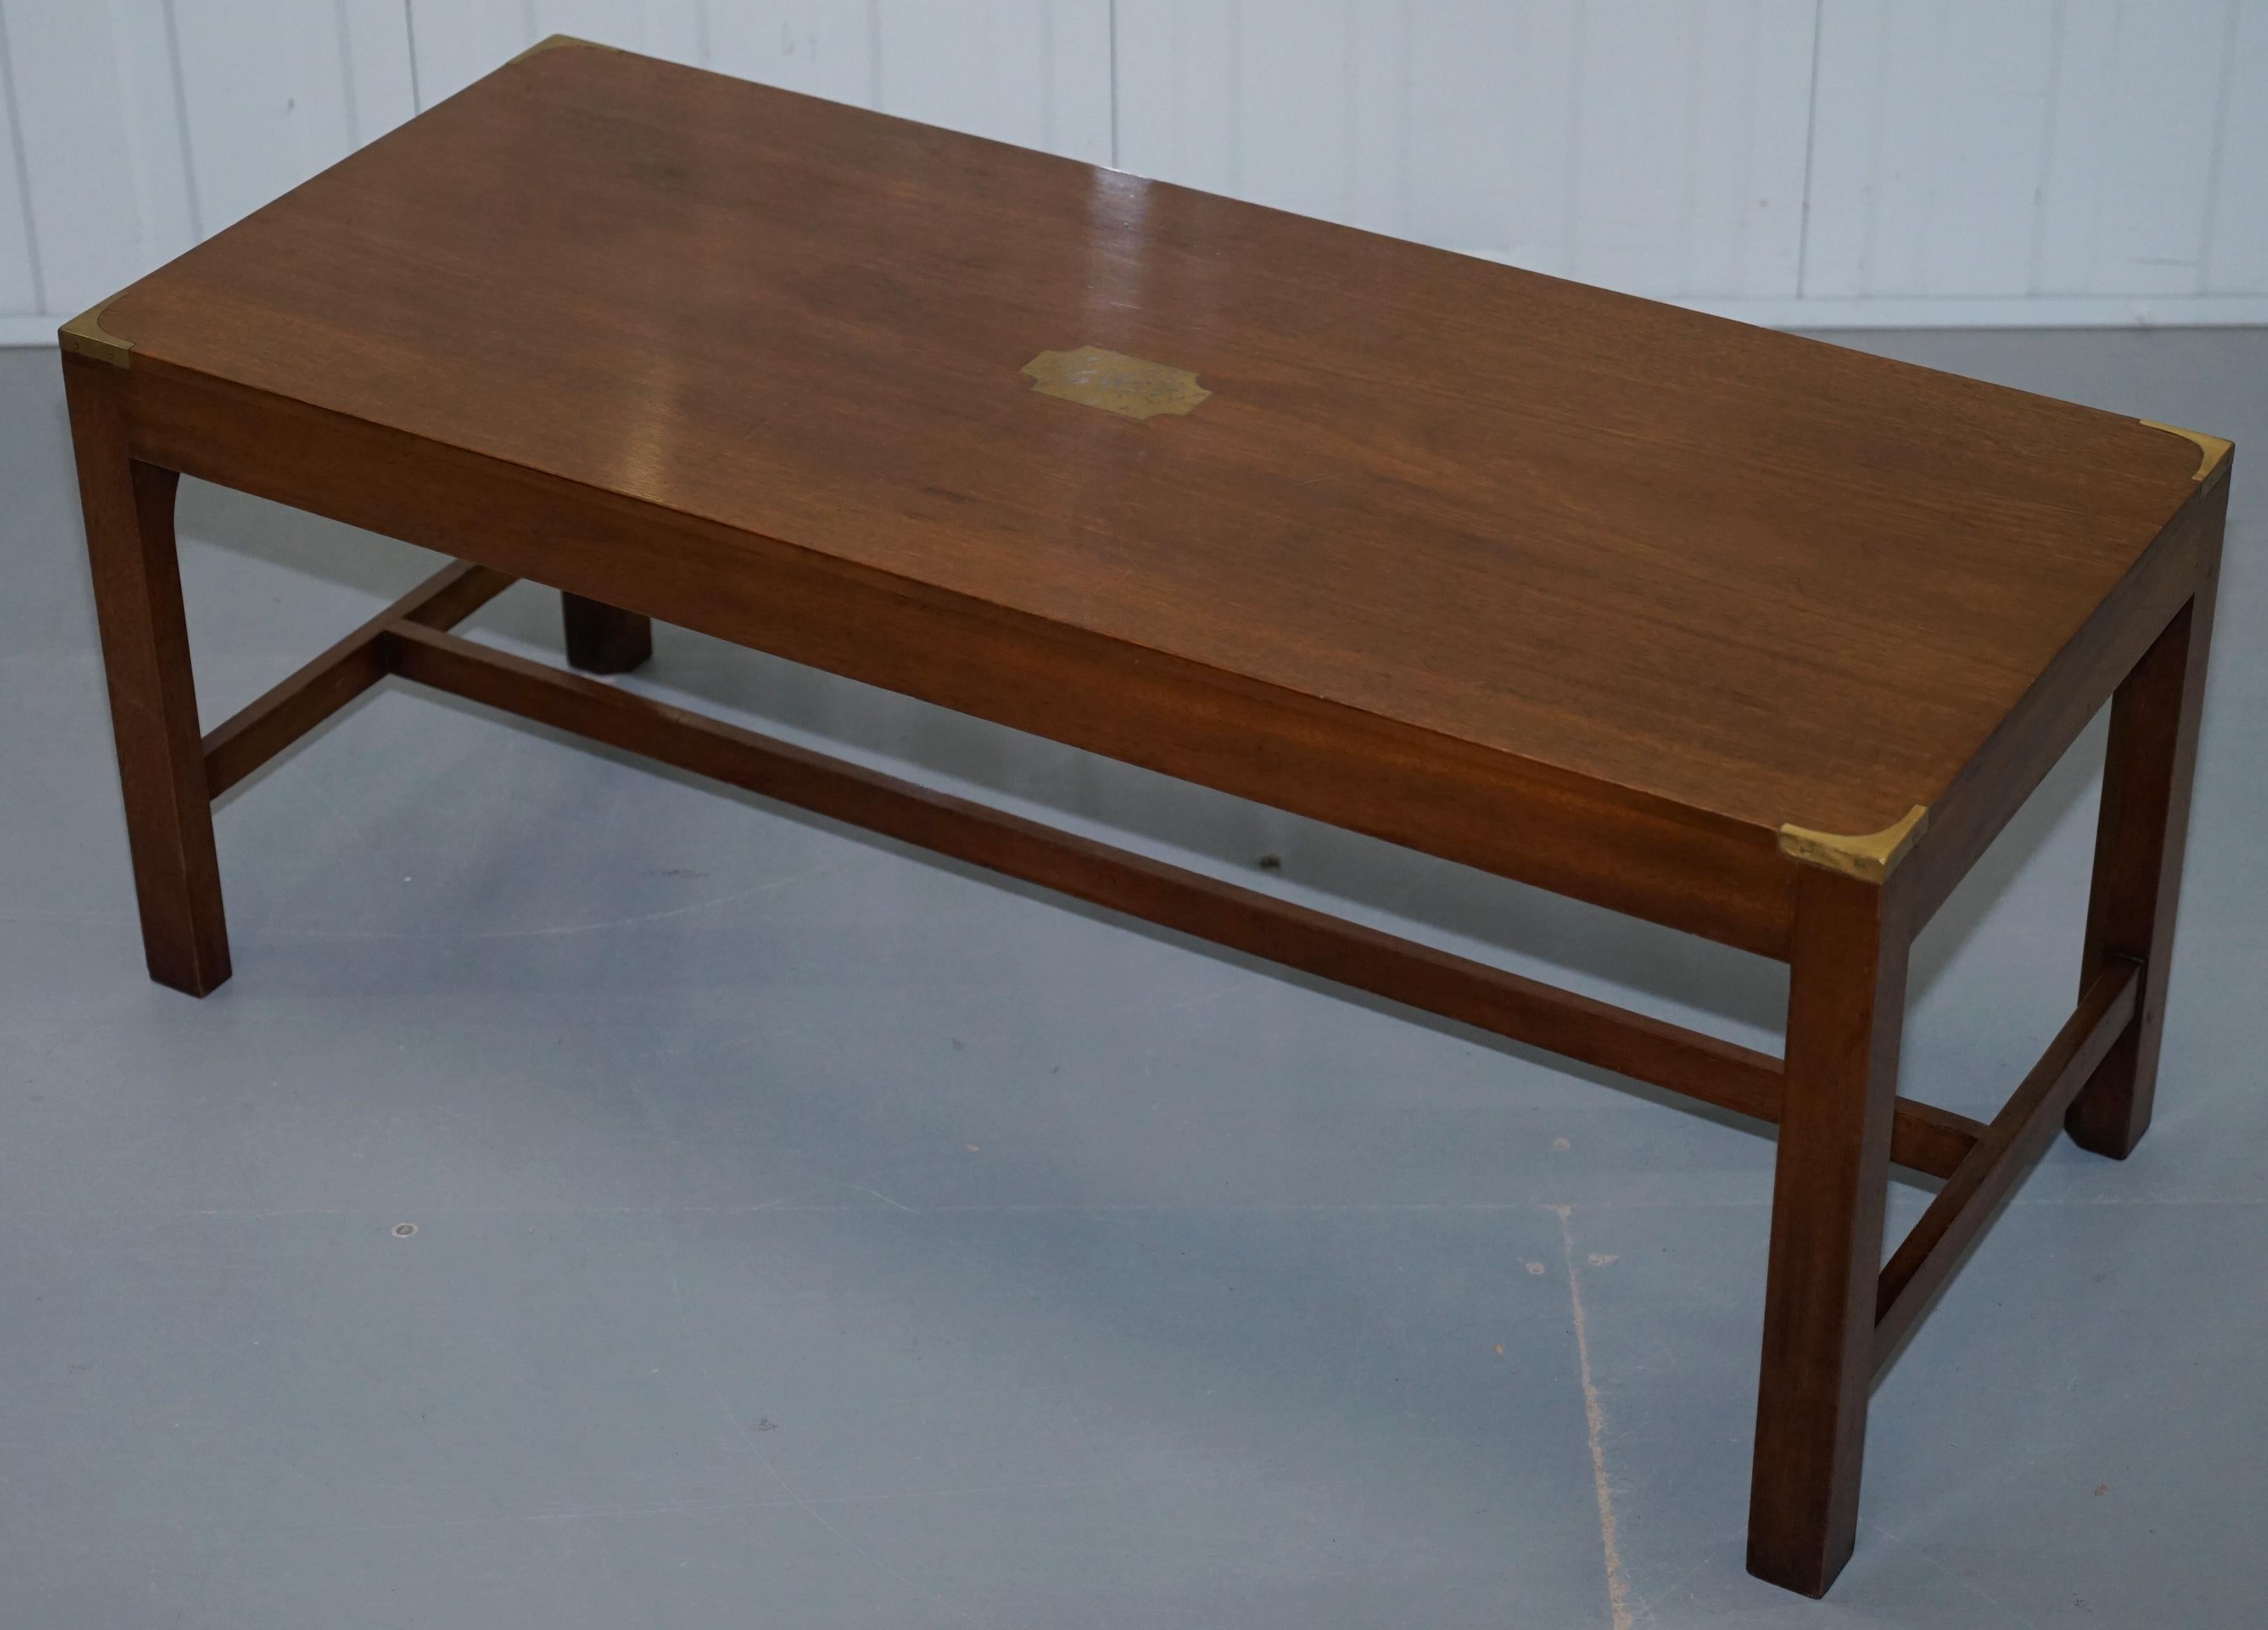 English Harrods London Mahogany Kennedy Furniture Military Campaign Coffee Table